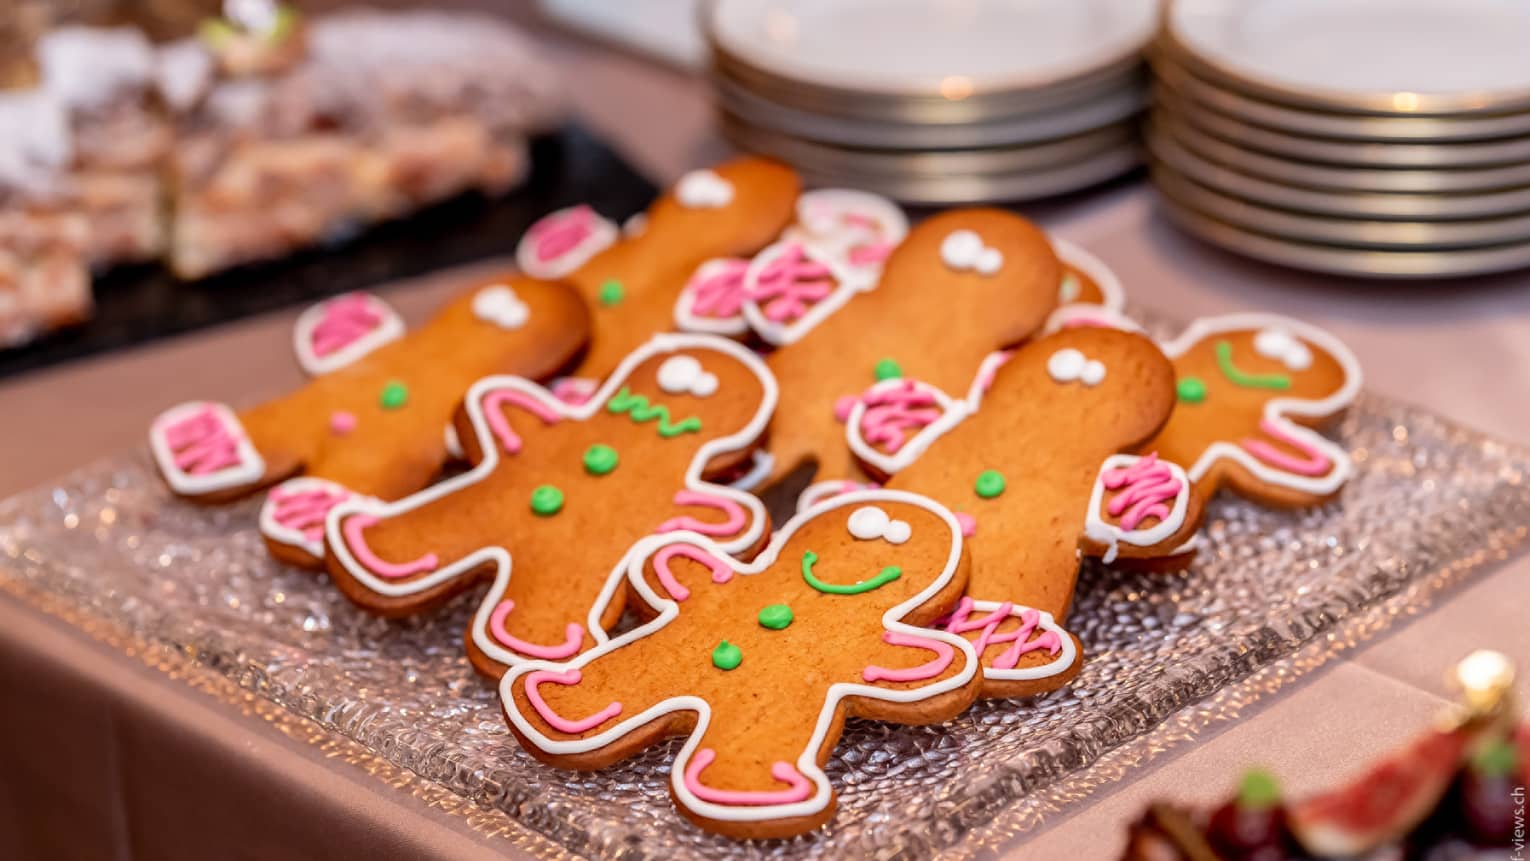 Rows of fresh-baked gingerbread men on display